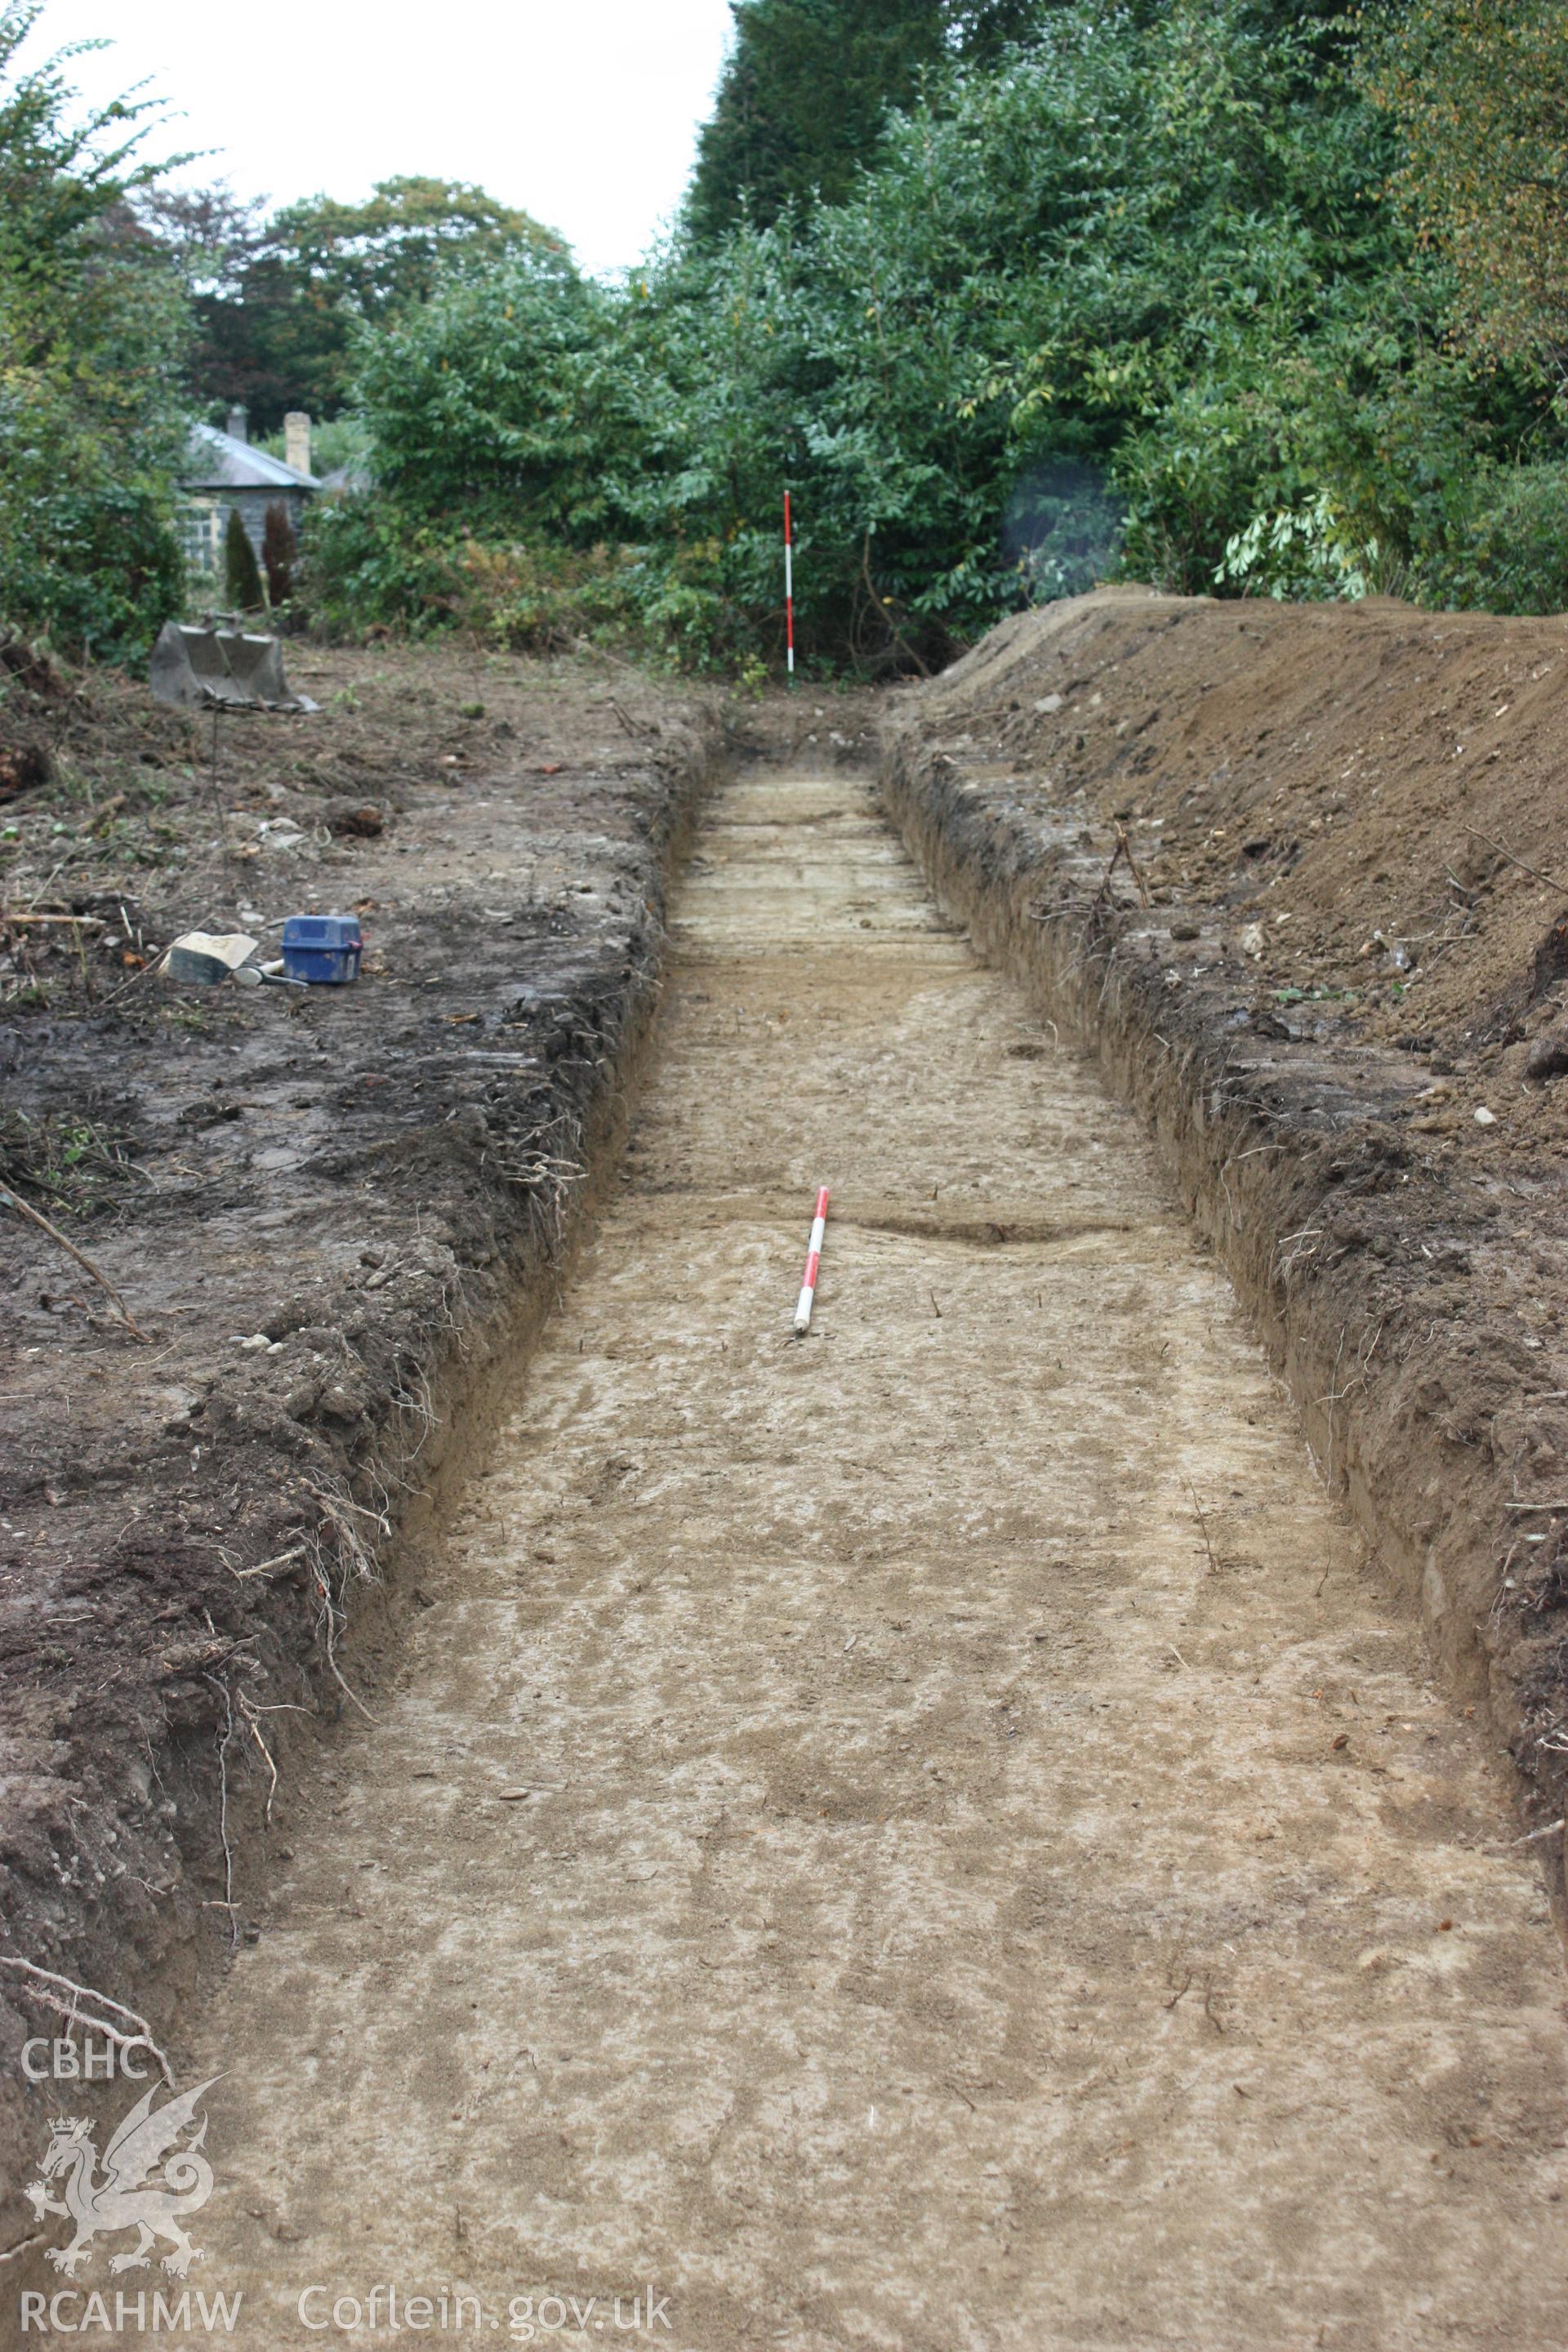 Digital photograph showing Trench 1 with linear feature [005] looking NE - part of archaeological field evaluation at Trawscoed Mansion, Trawscoed, produced by Cambrian Archaeological Projects Ltd.